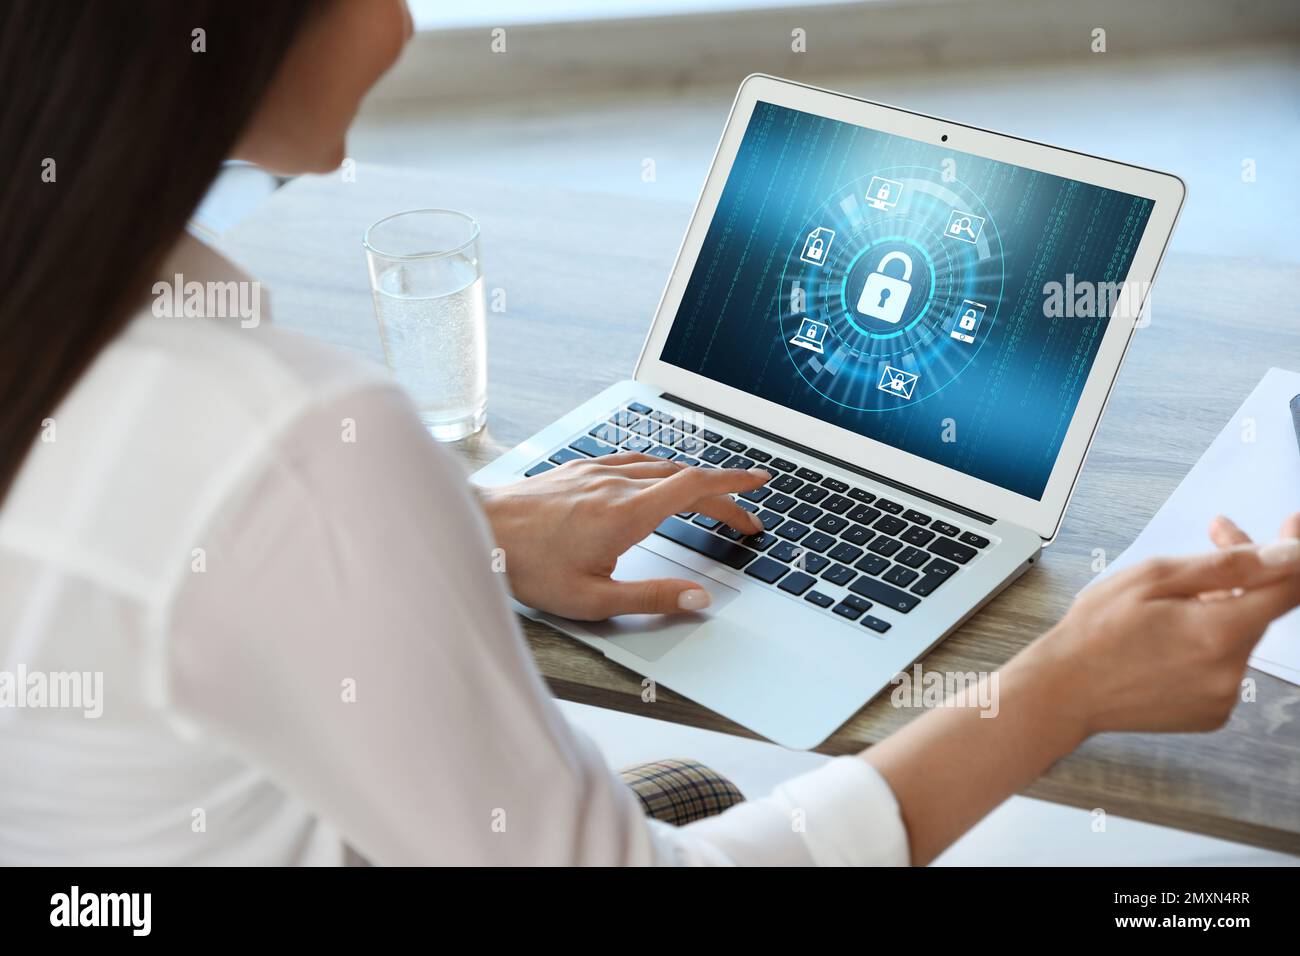 Cyber security concept. Woman using application on laptop, closeup Stock Photo